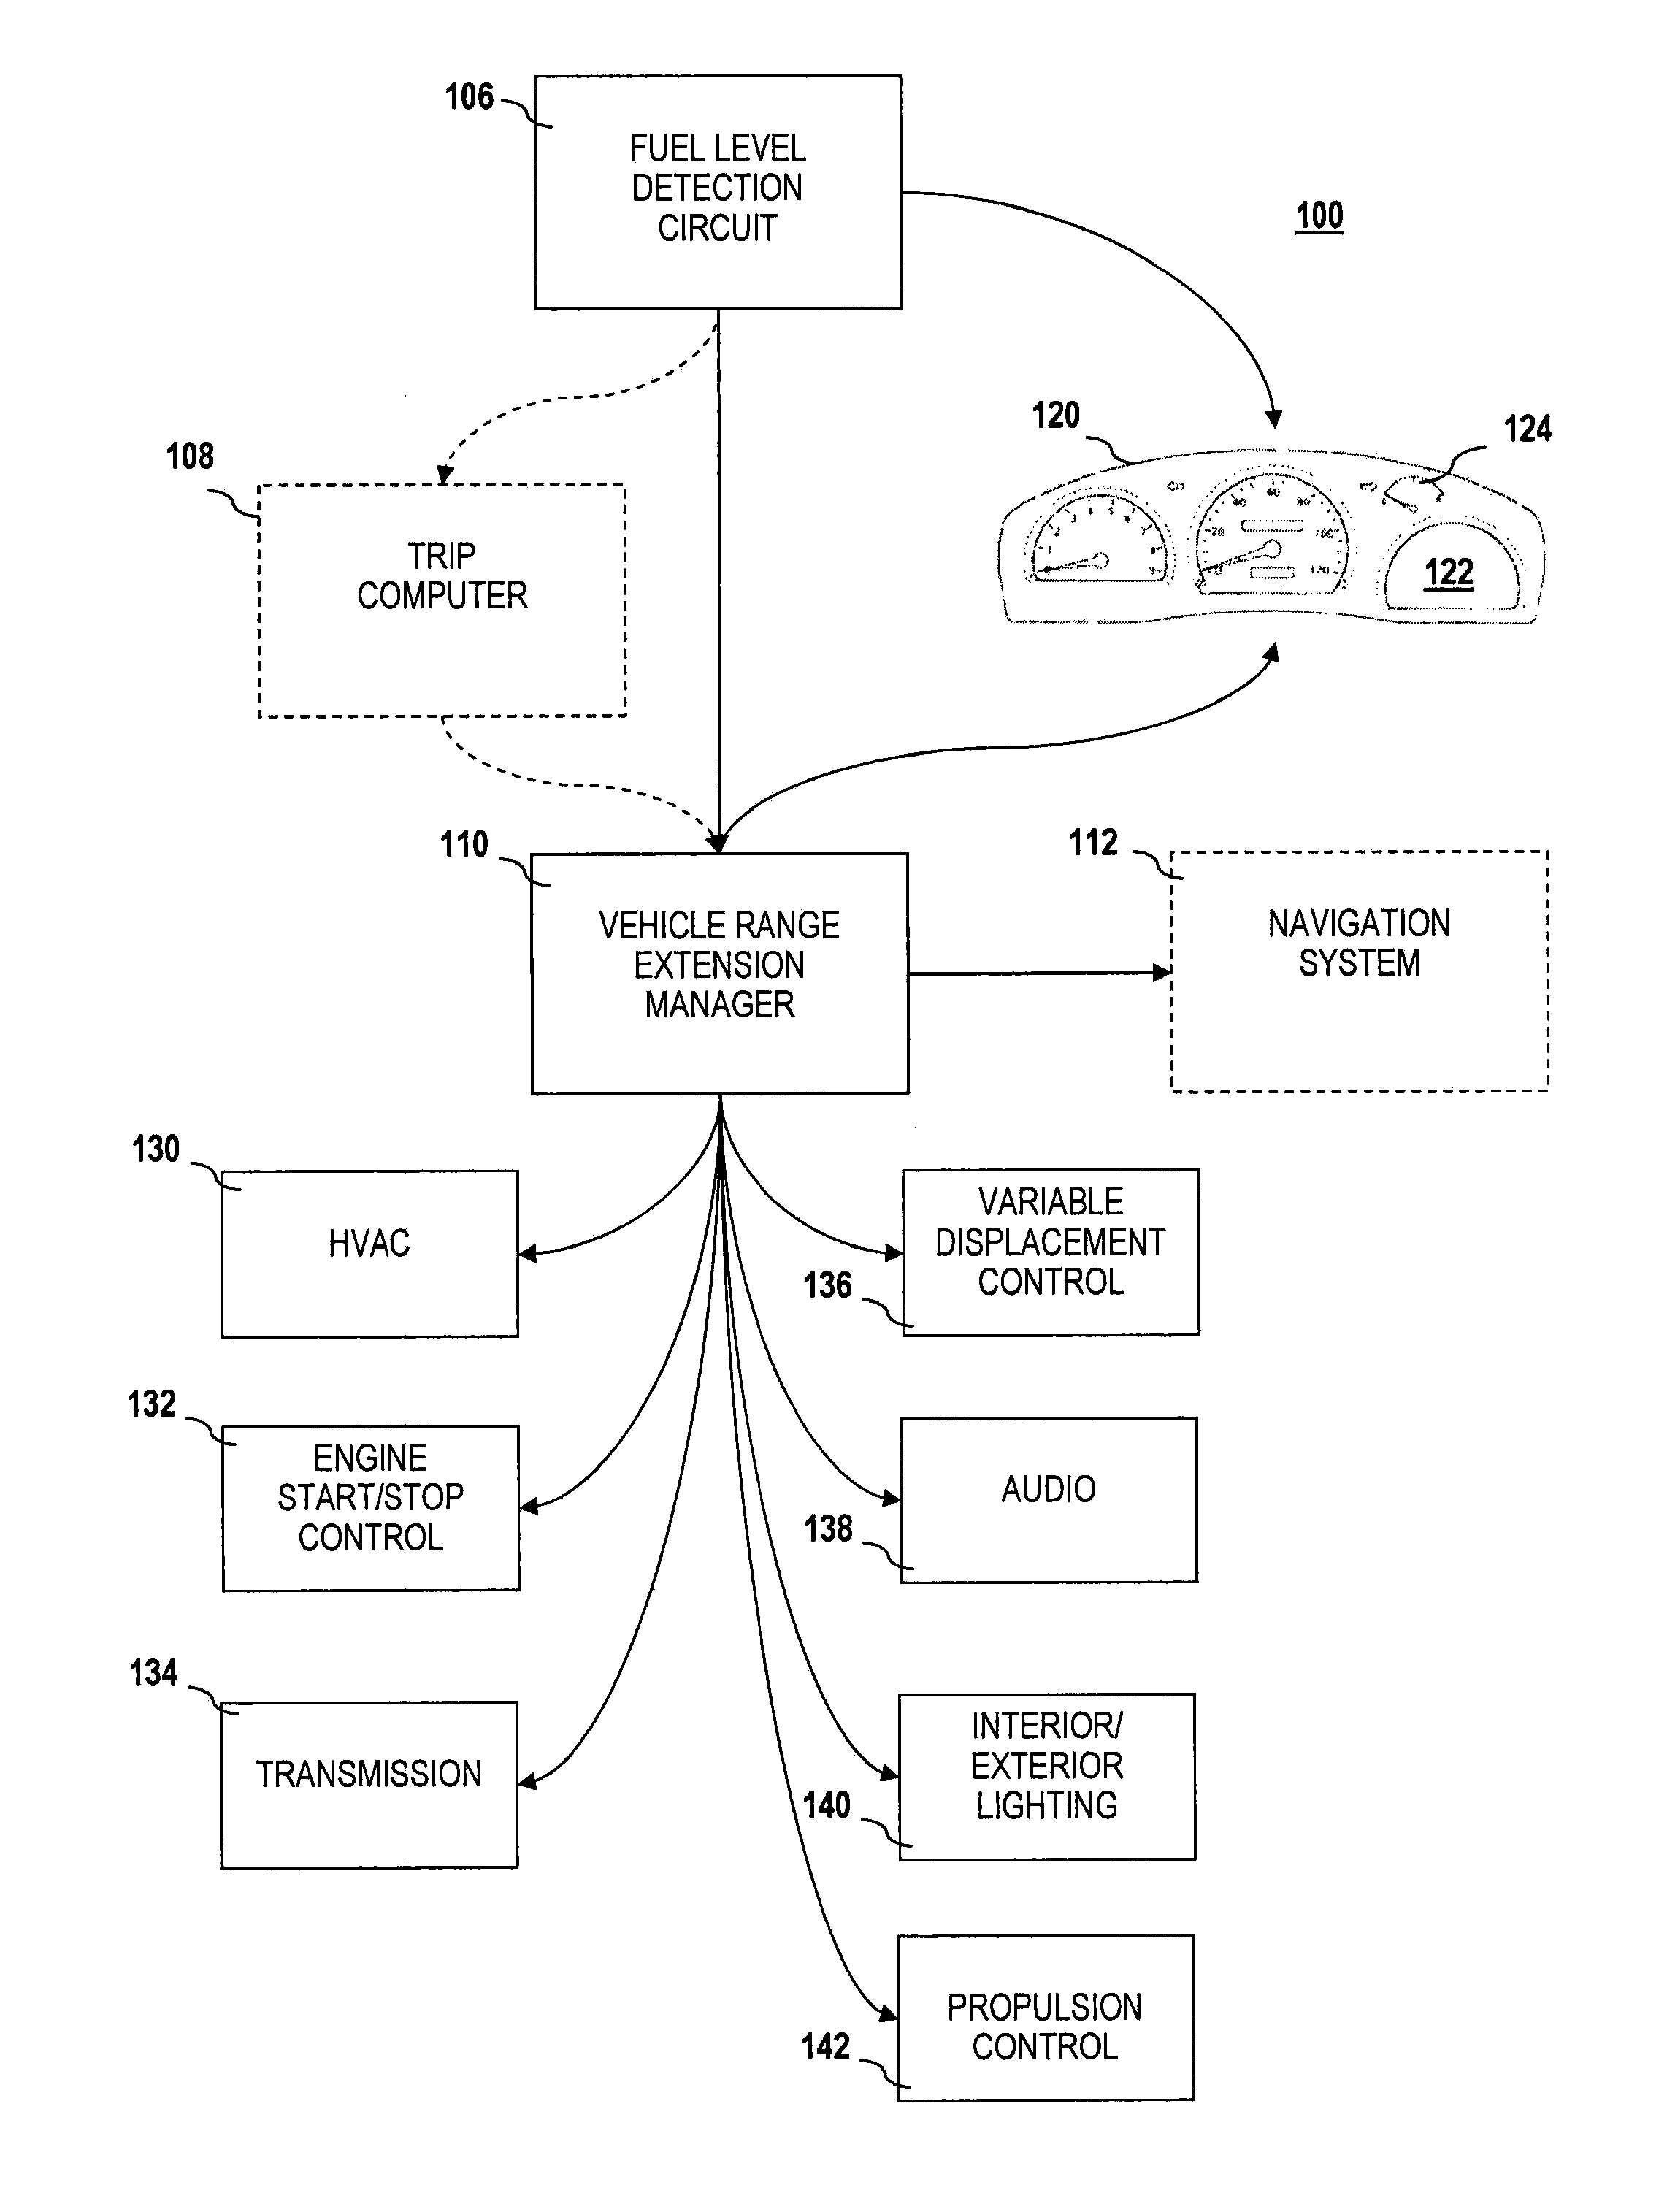 System and method for vehicle range extension on detection of a low fuel condition